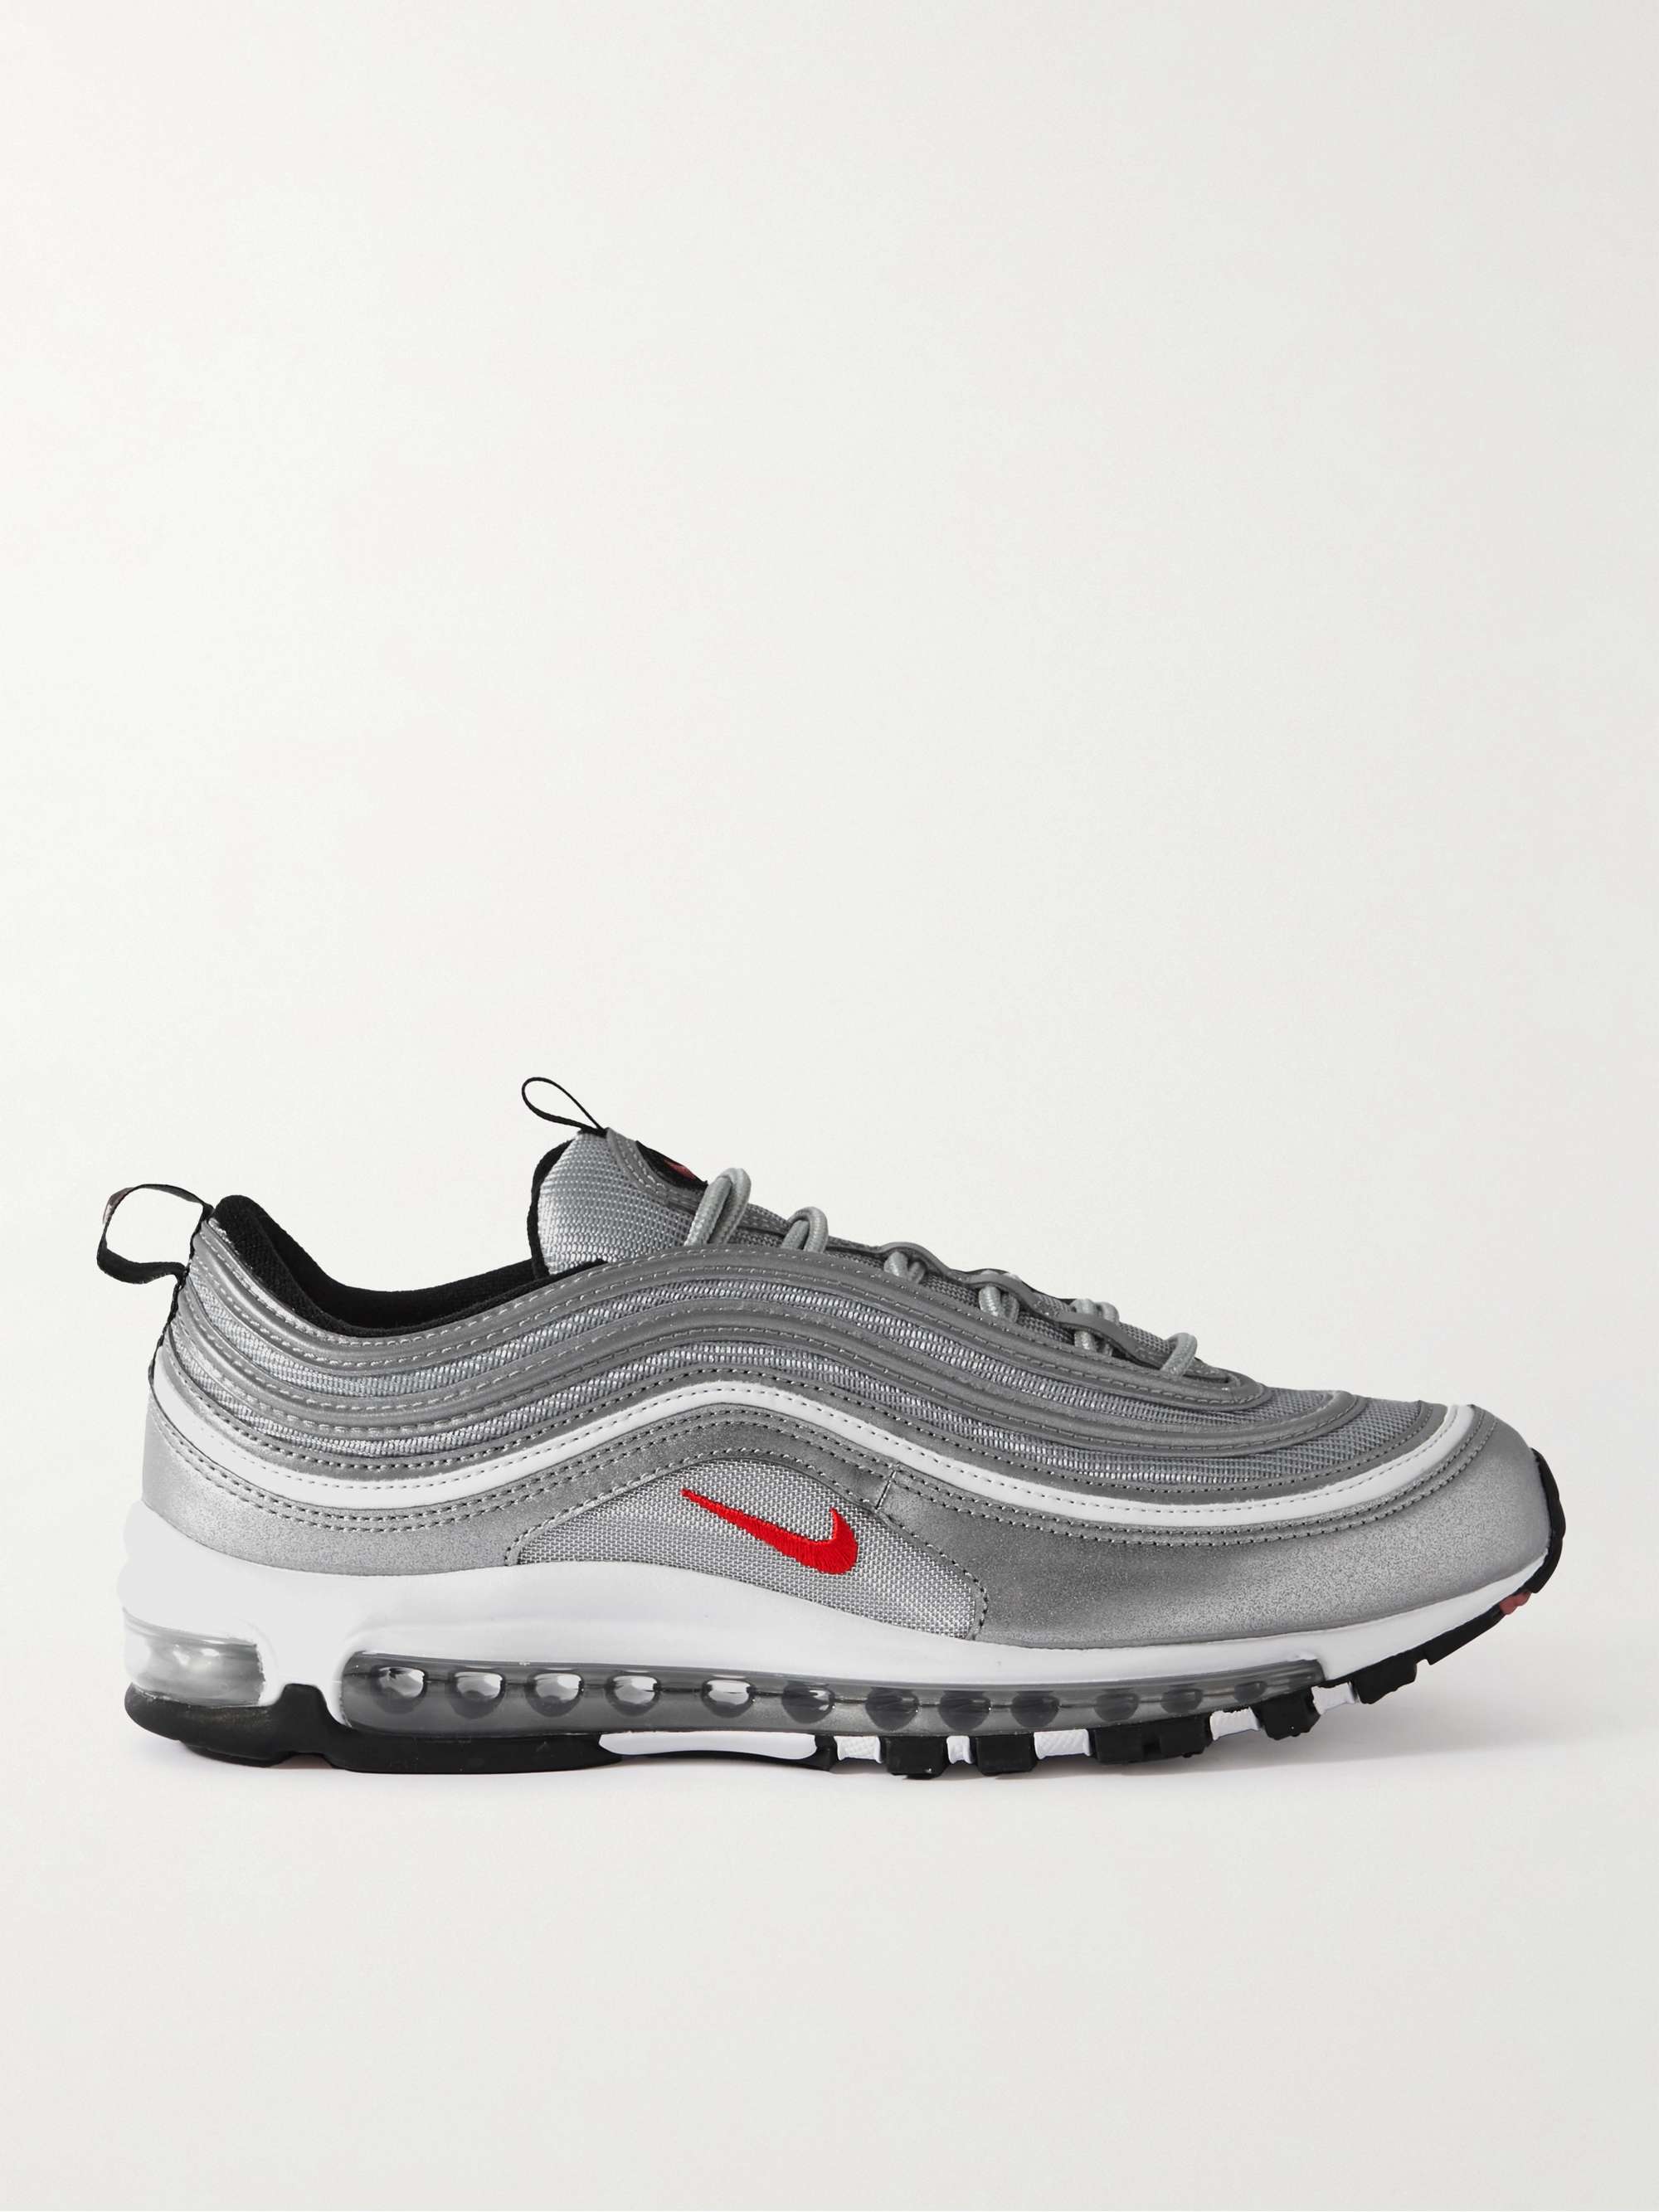 tarief Systematisch tank NIKE Air Max 97 Metallic Leather and Mesh Sneakers | MR PORTER